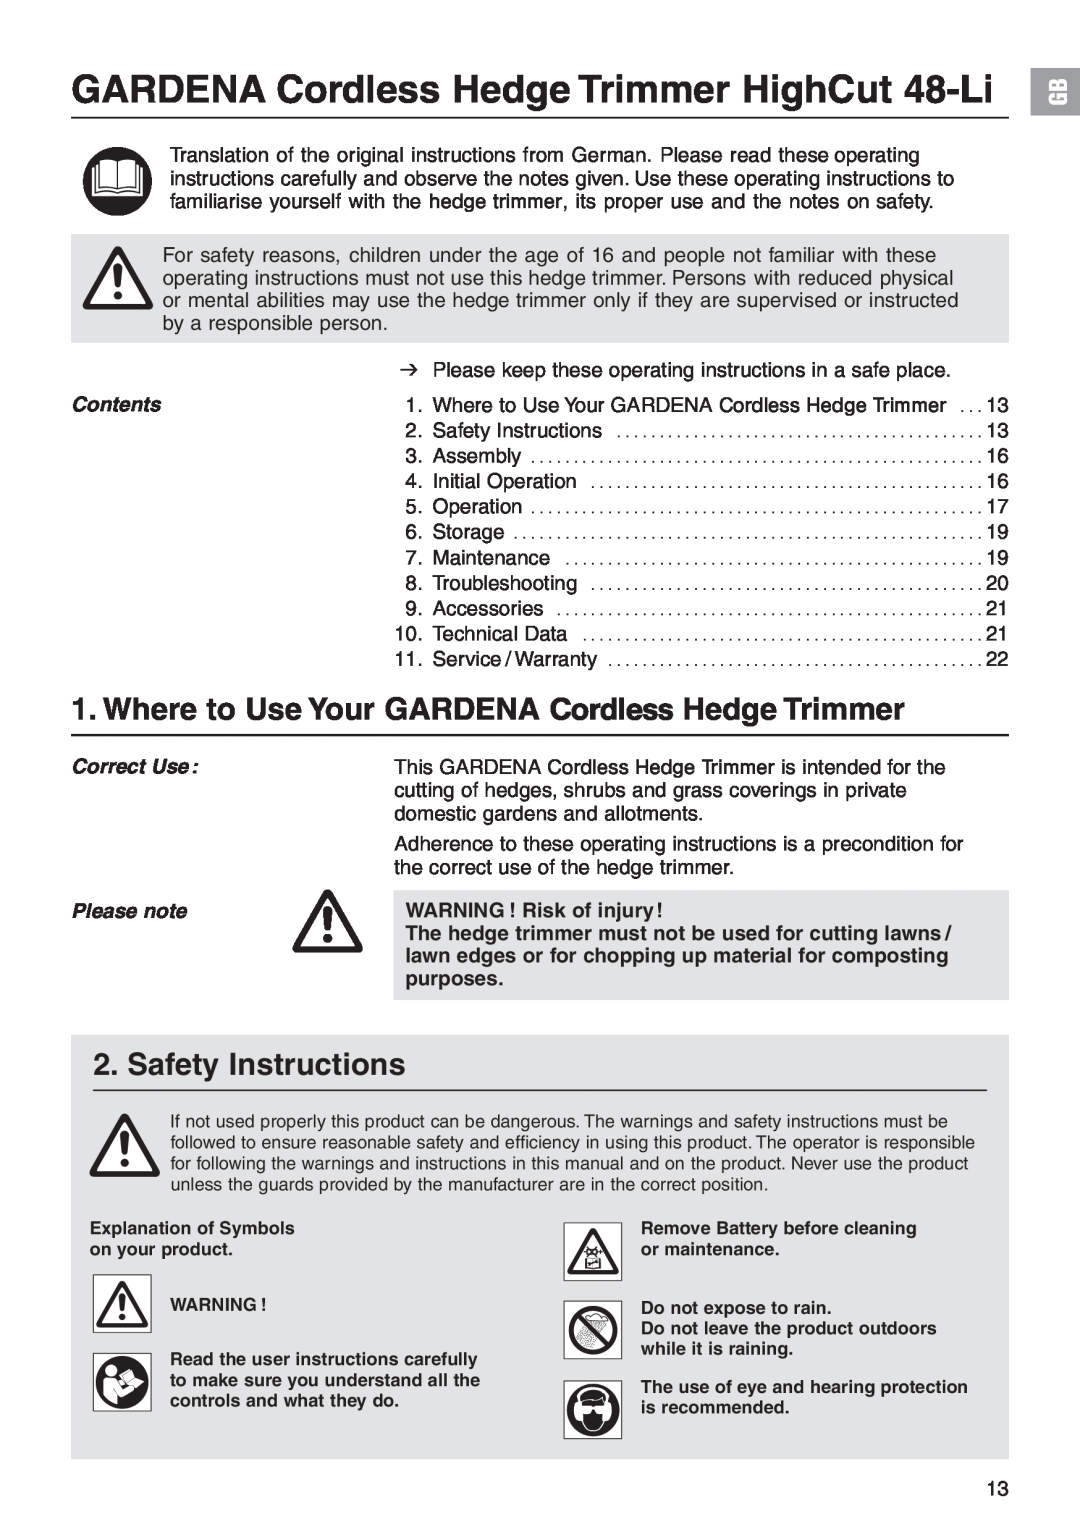 Gardena 8882 Where to Use Your GARDENA Cordless Hedge Trimmer, Safety Instructions, Contents, Correct Use, Please note 